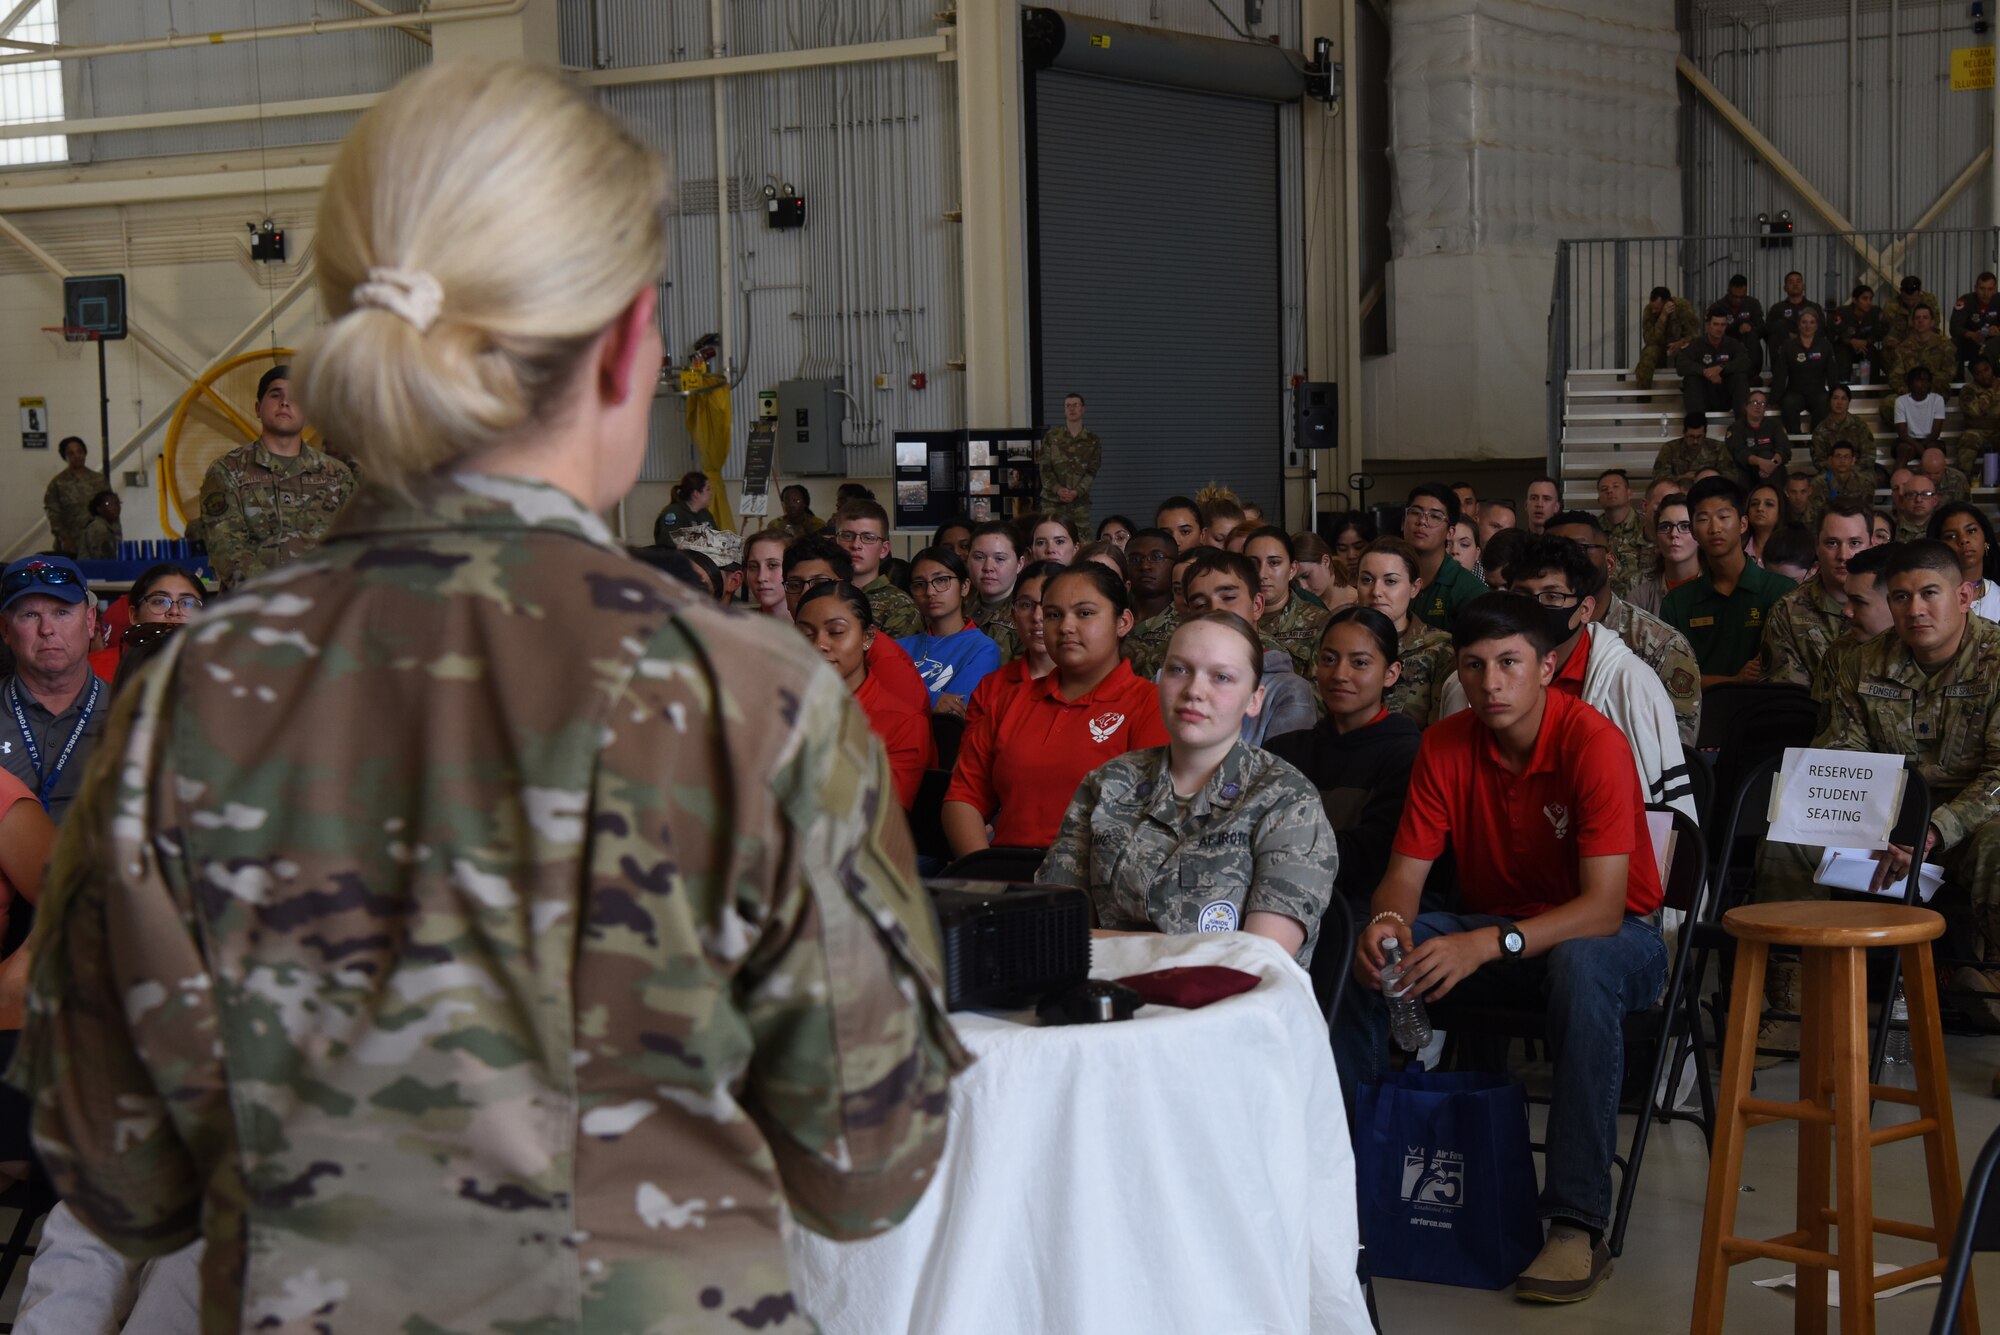 Maj. Gen. Laura L. Lenderman, Air Mobility Command director of operations for strategic deterrence and nuclear integration, answers the questions of ROTC students at Dyess Air Force Base, Texas, April 29, 2022. The Women Airforce Service Pilots inspired generations of women into military service, including pilot Terry Rinehart, one of the first 10 women to be hired as a commercial pilot, and Col. Kimberly Olsen, one of the first female pilots in the Air Force. (U.S. Air Force Photo by Senior Airman Sophia Robello)